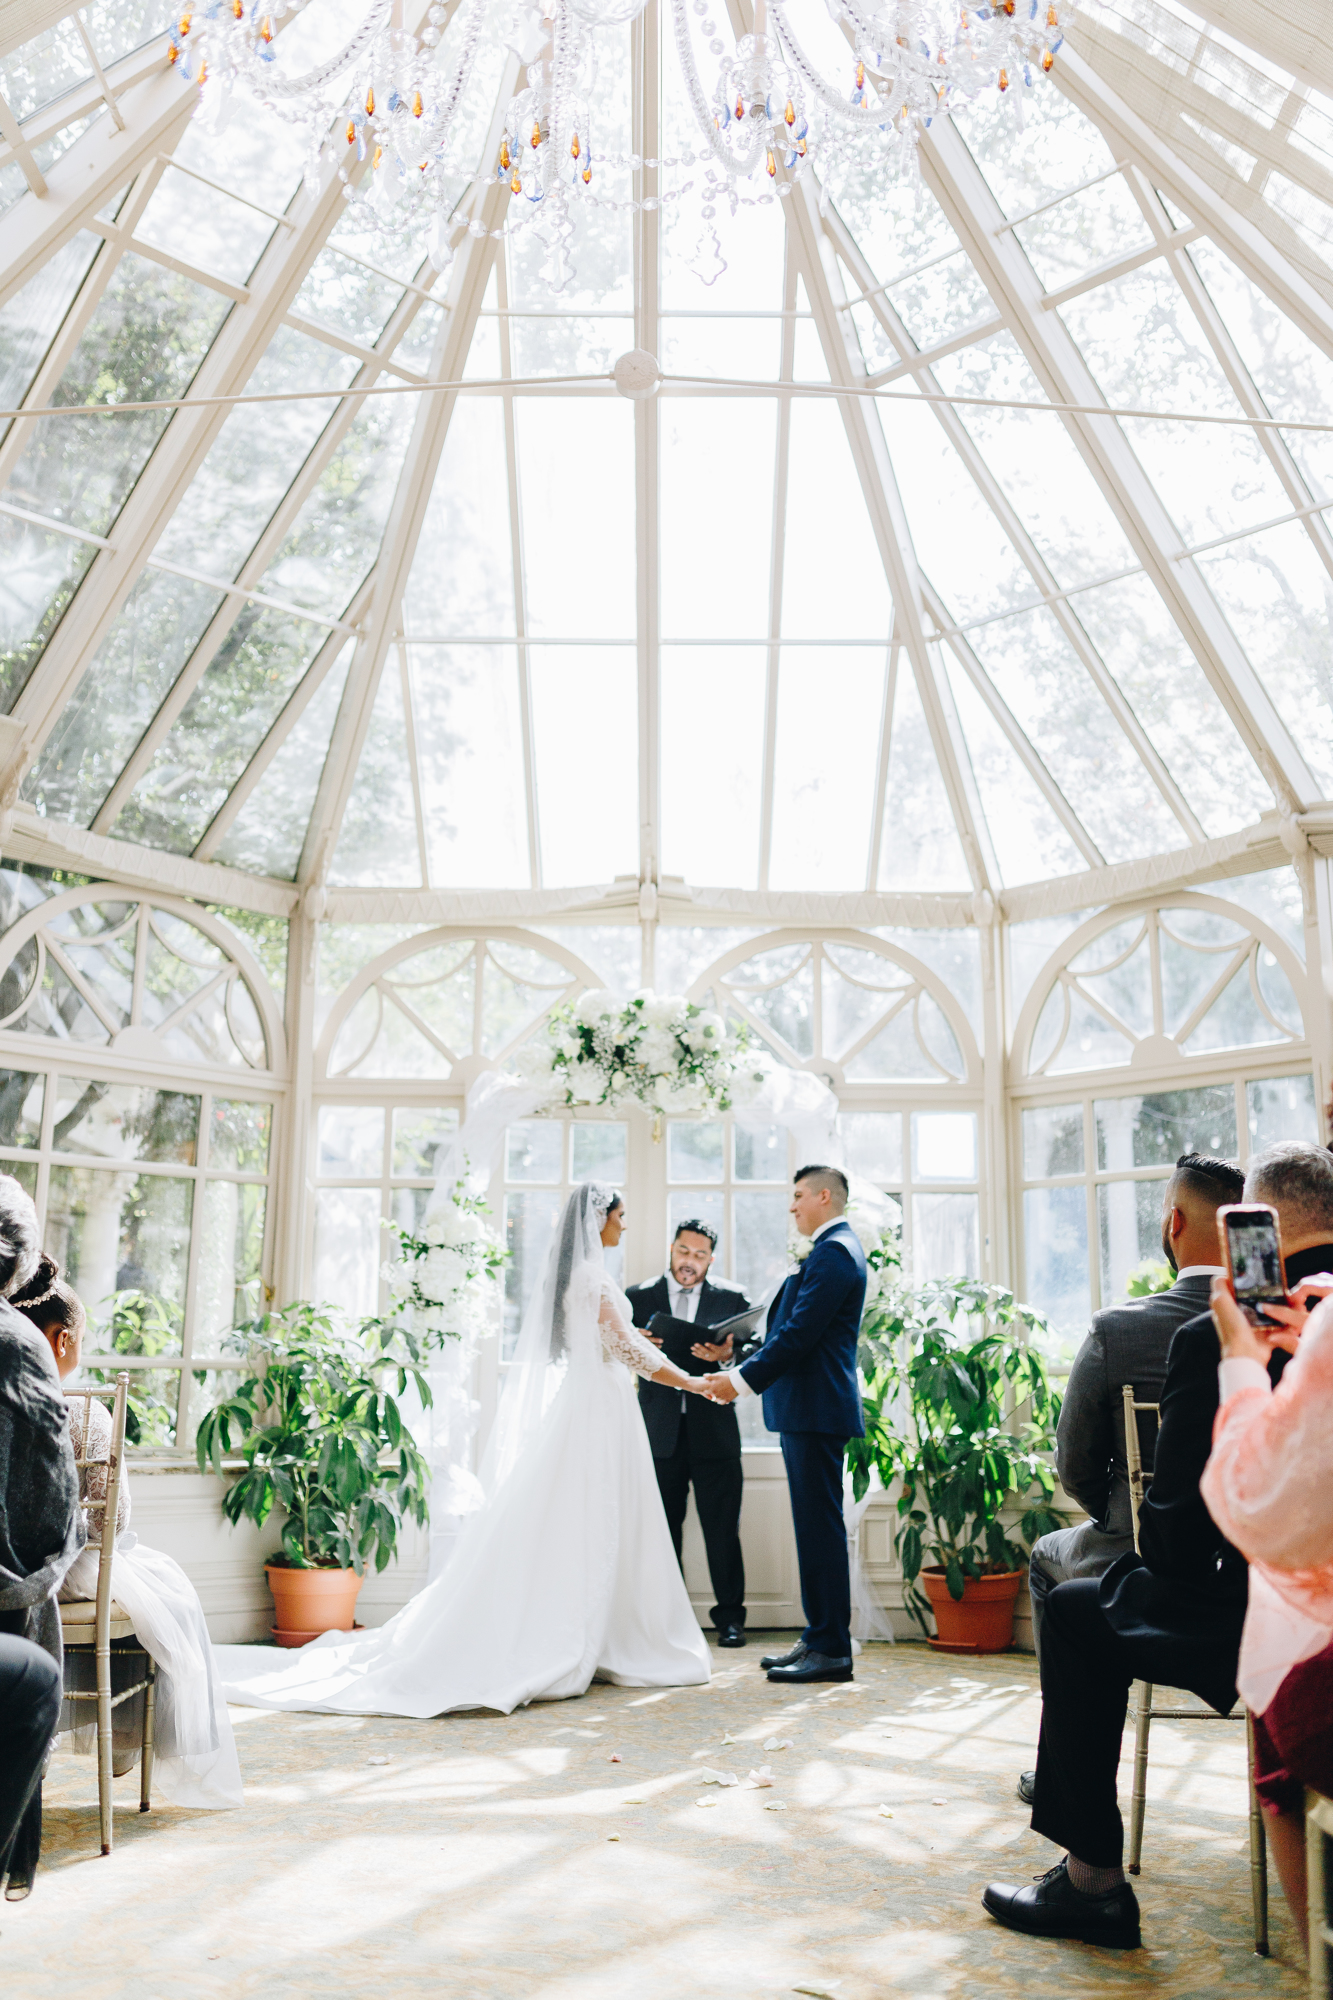 Gorgeous indoor wedding venue for fall wedding in New Jersey